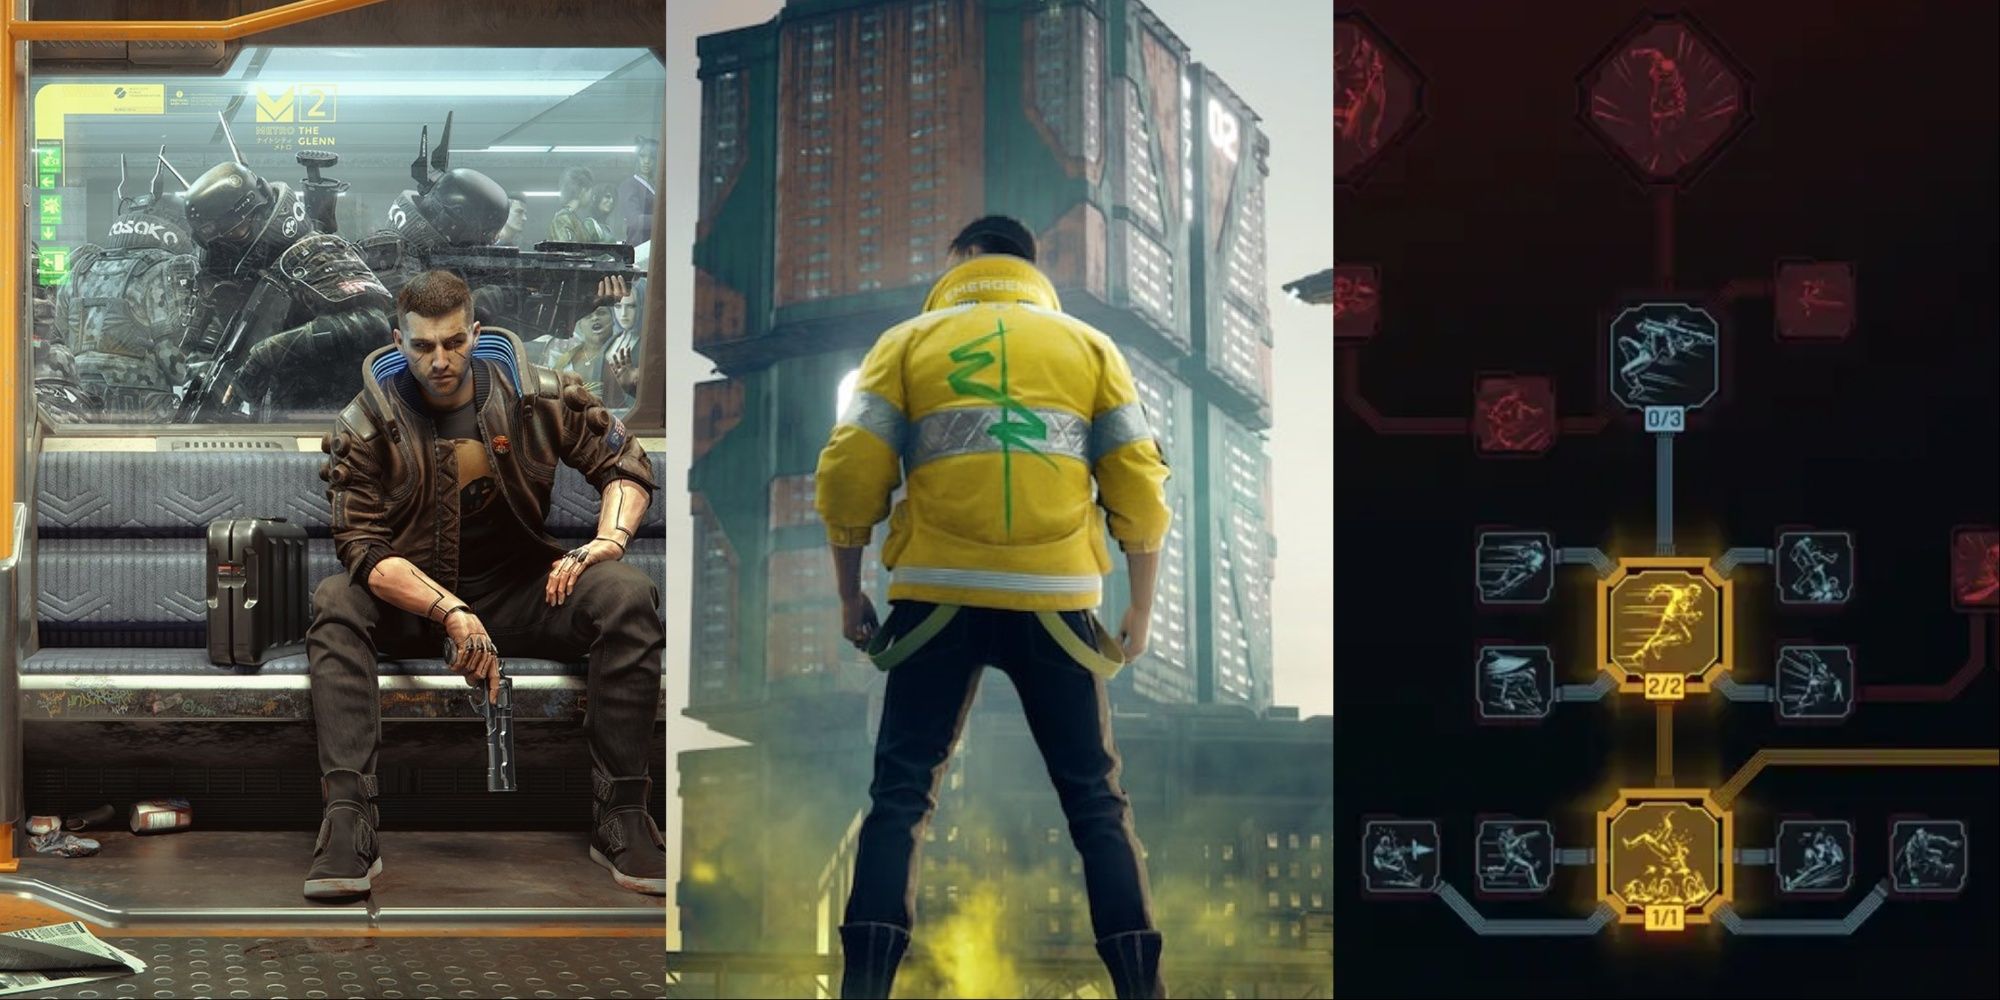 Split image showing male V in a yellow jacket and sitting on the metro and the perk tree menu